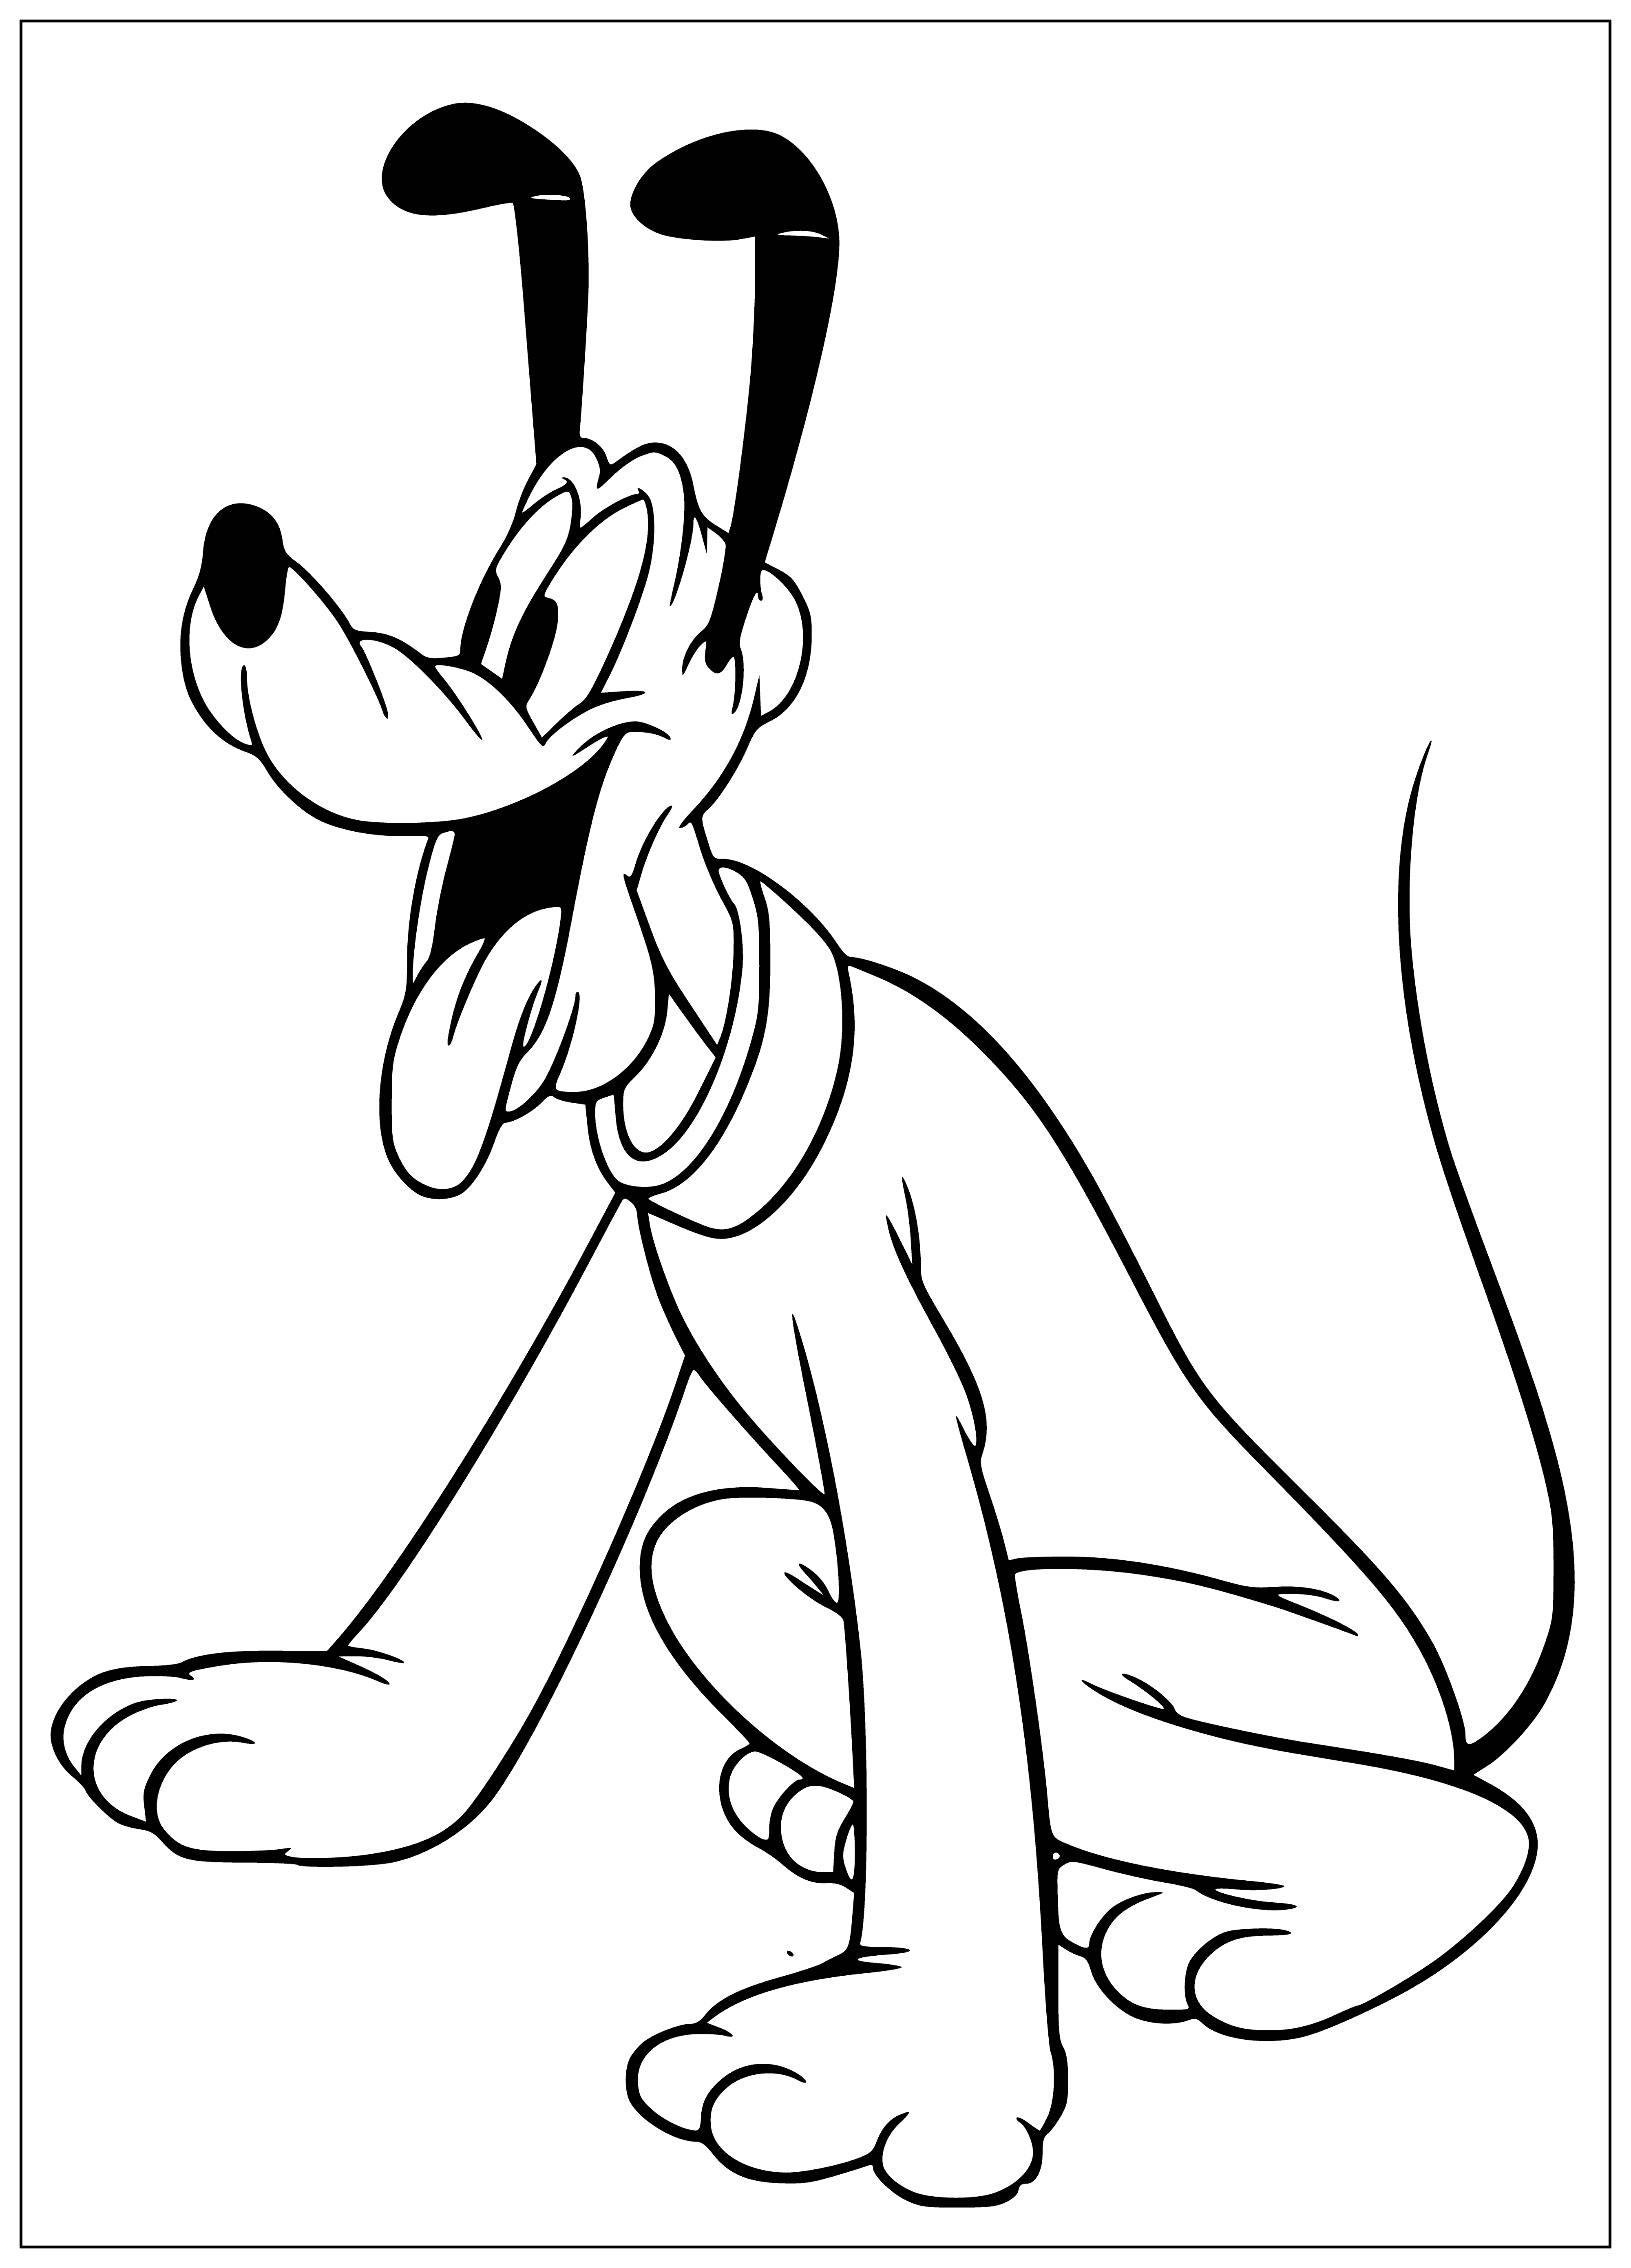 Dog Pluto coloring page